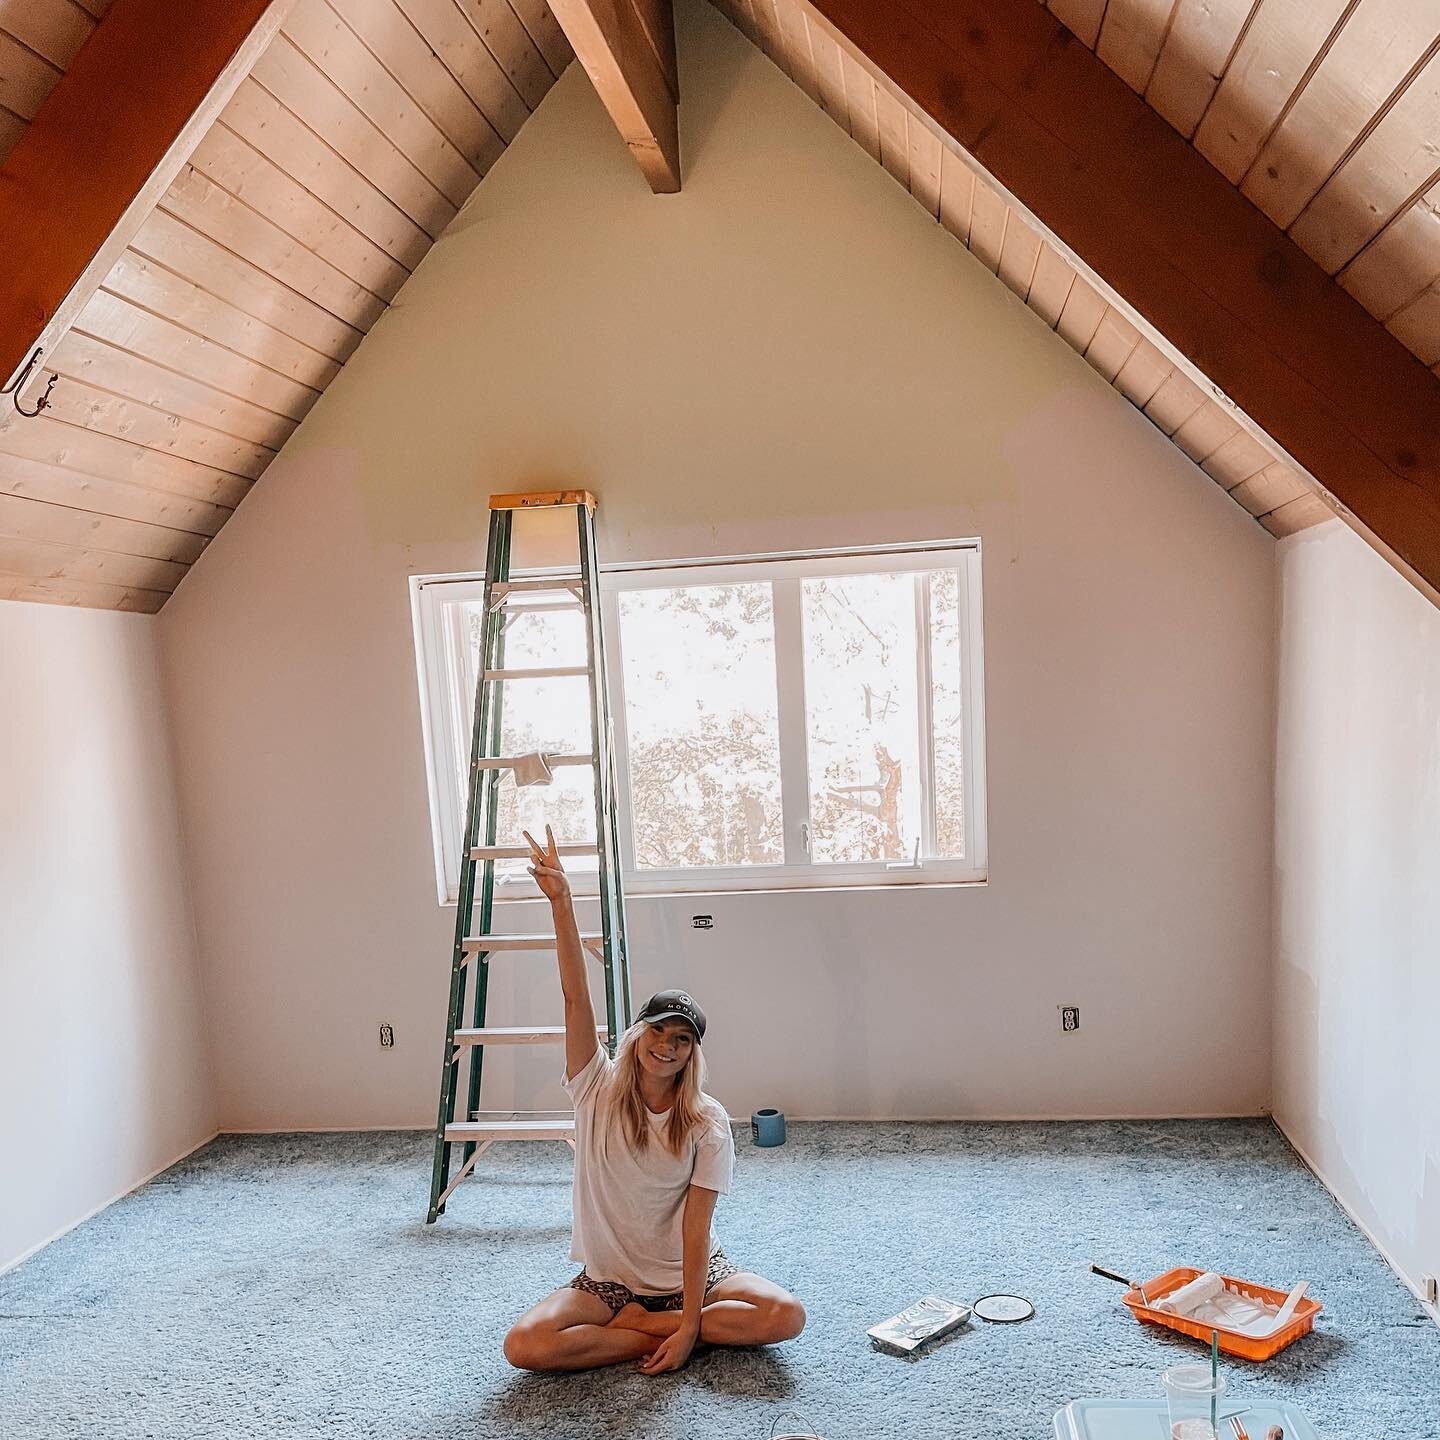 You can call me Alexa the renovator 🔨🧰
Lots of changes are occurring in life right now including renovating my childhood home! Never did I think at 25 I would be retried from my 9-5 and renovating a home I&rsquo;ve always dreamt of redoing!

Here&r